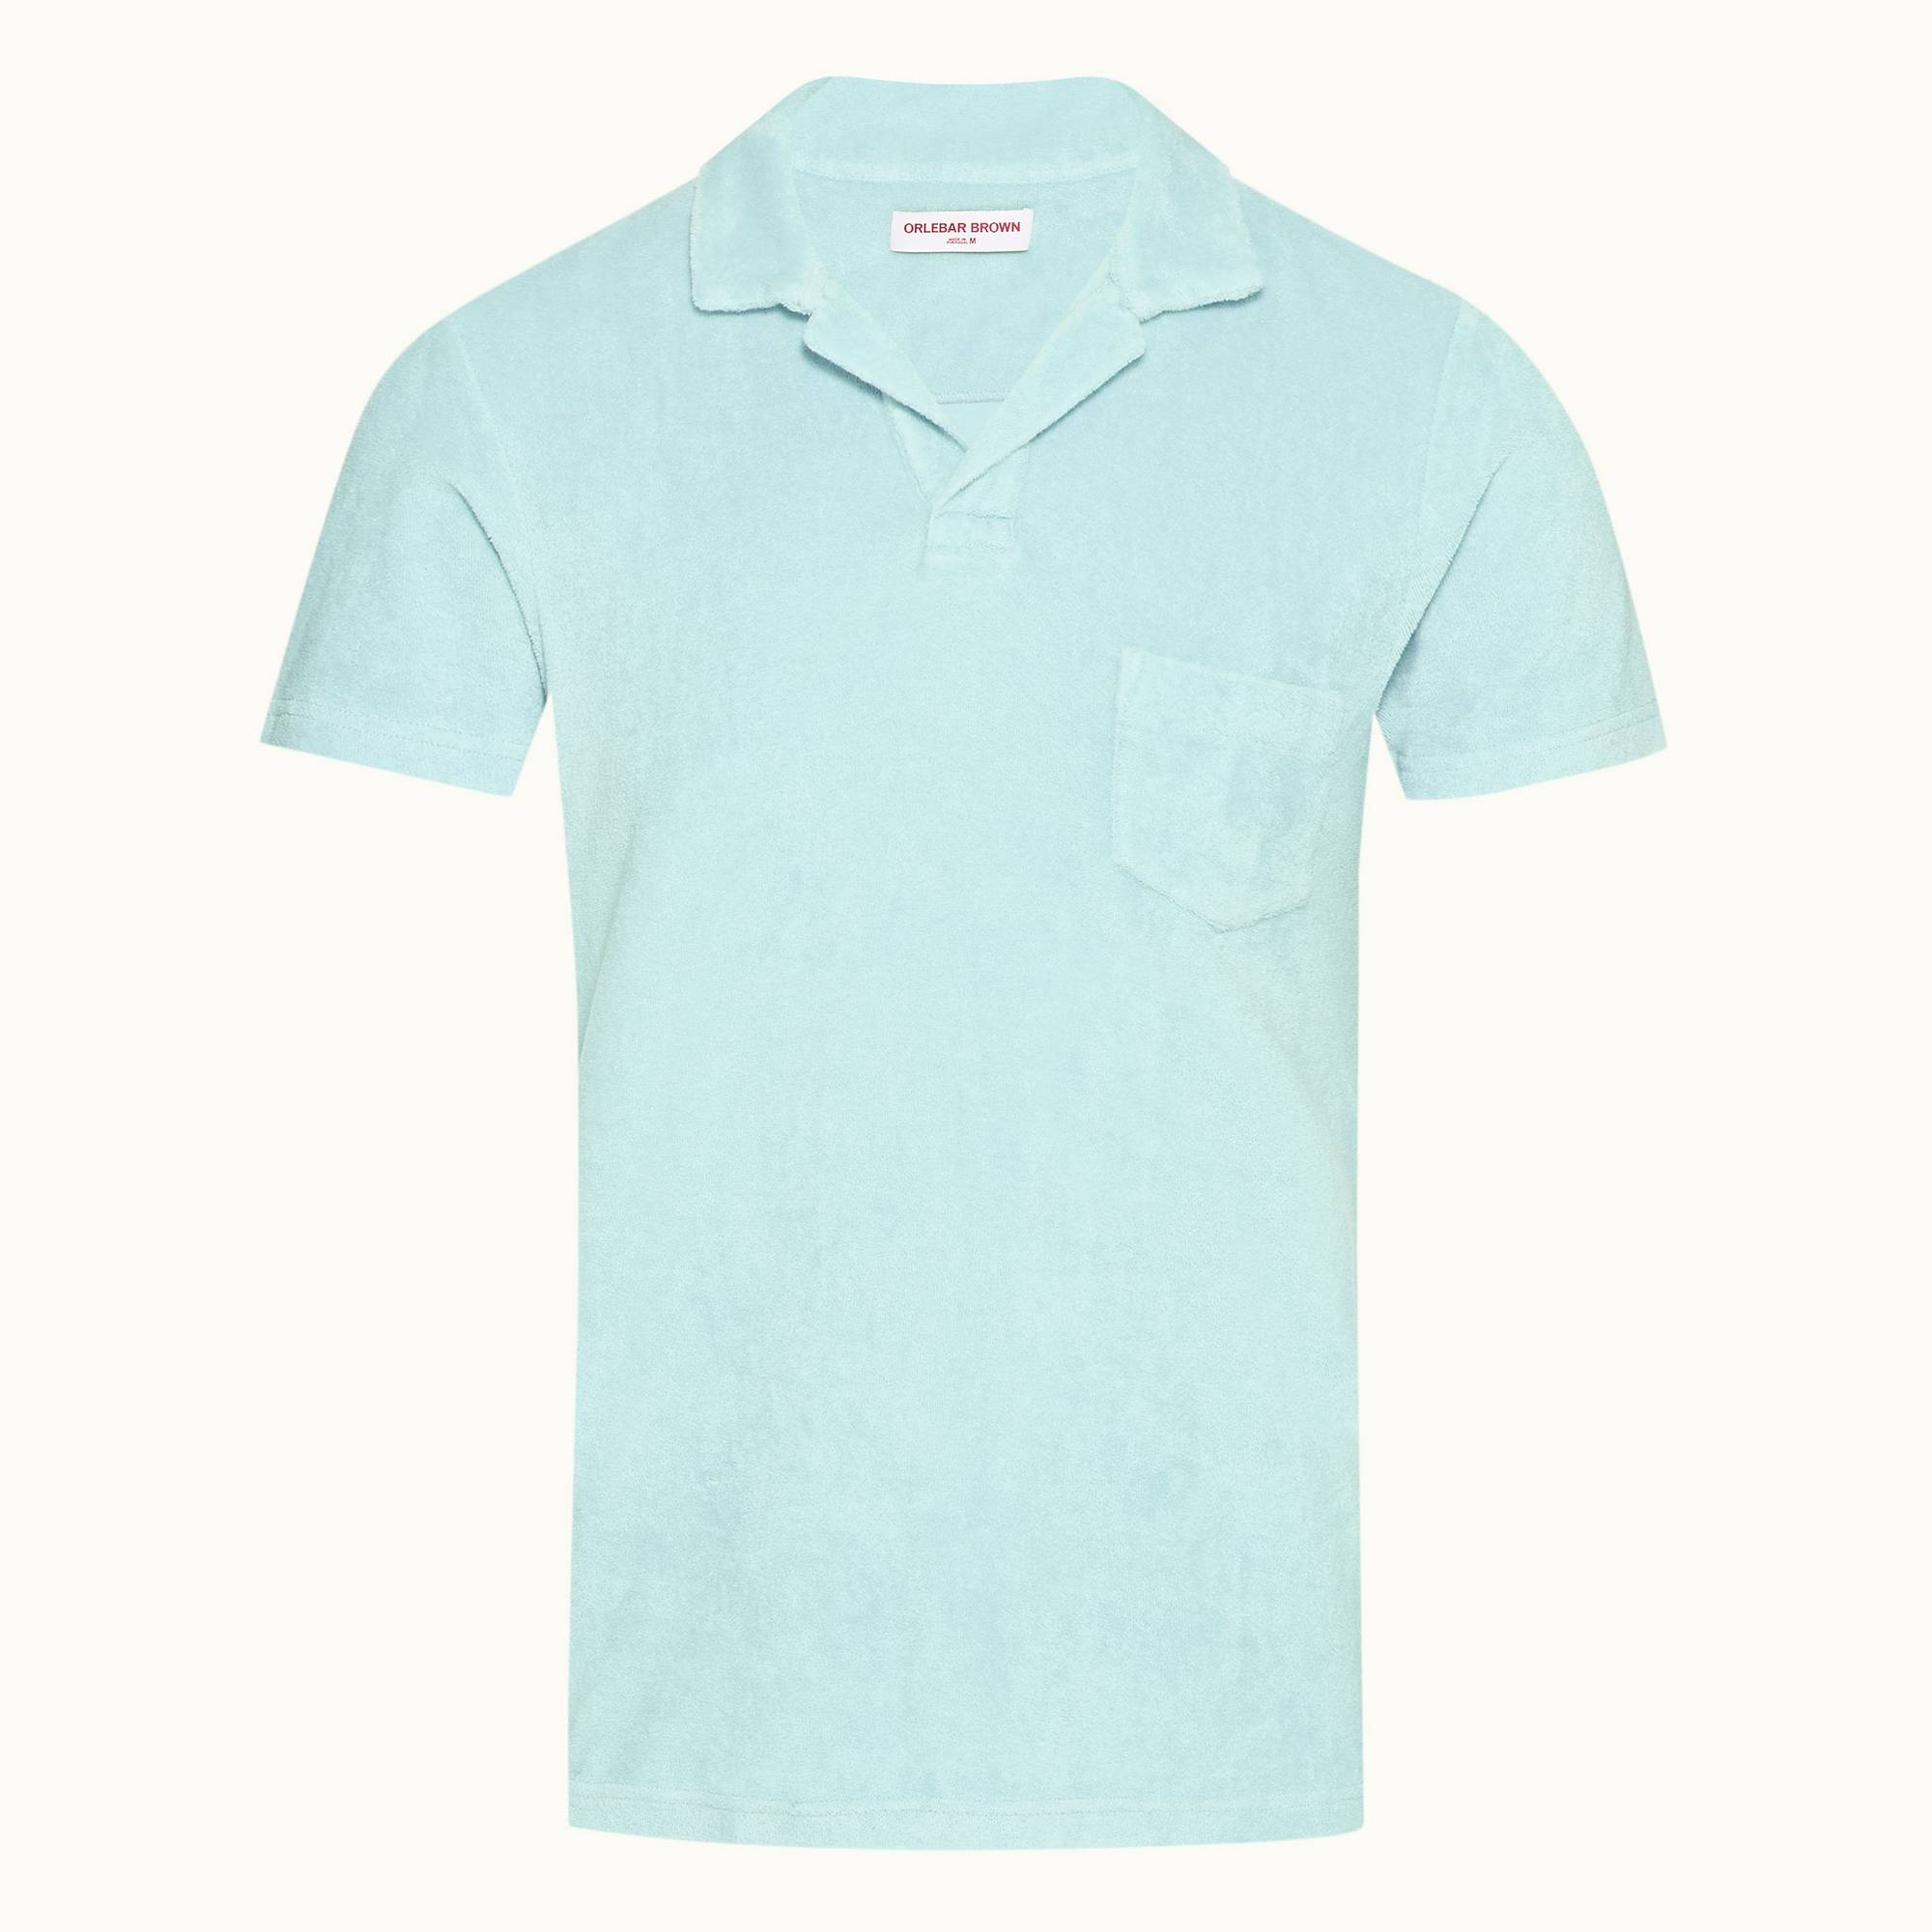 Terry Towelling - Mens Clear Sky Tailored Fit Resort Towelling Polo Shirt